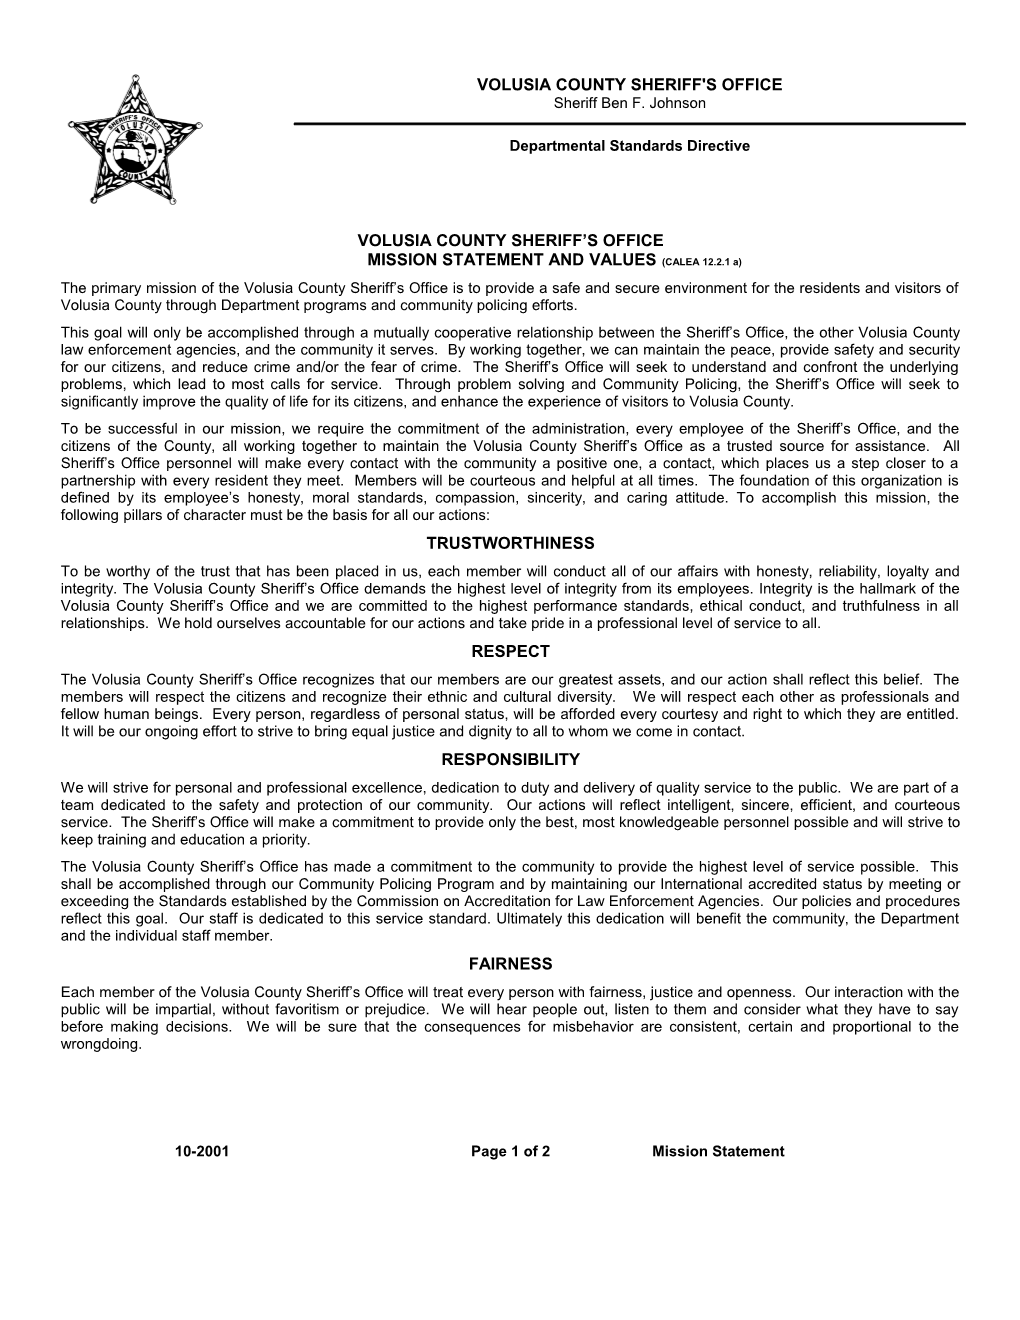 VOLUSIA COUNTY SHERIFF S OFFICE MISSION STATEMENT and VALUES (CALEA 12.2.1 A)